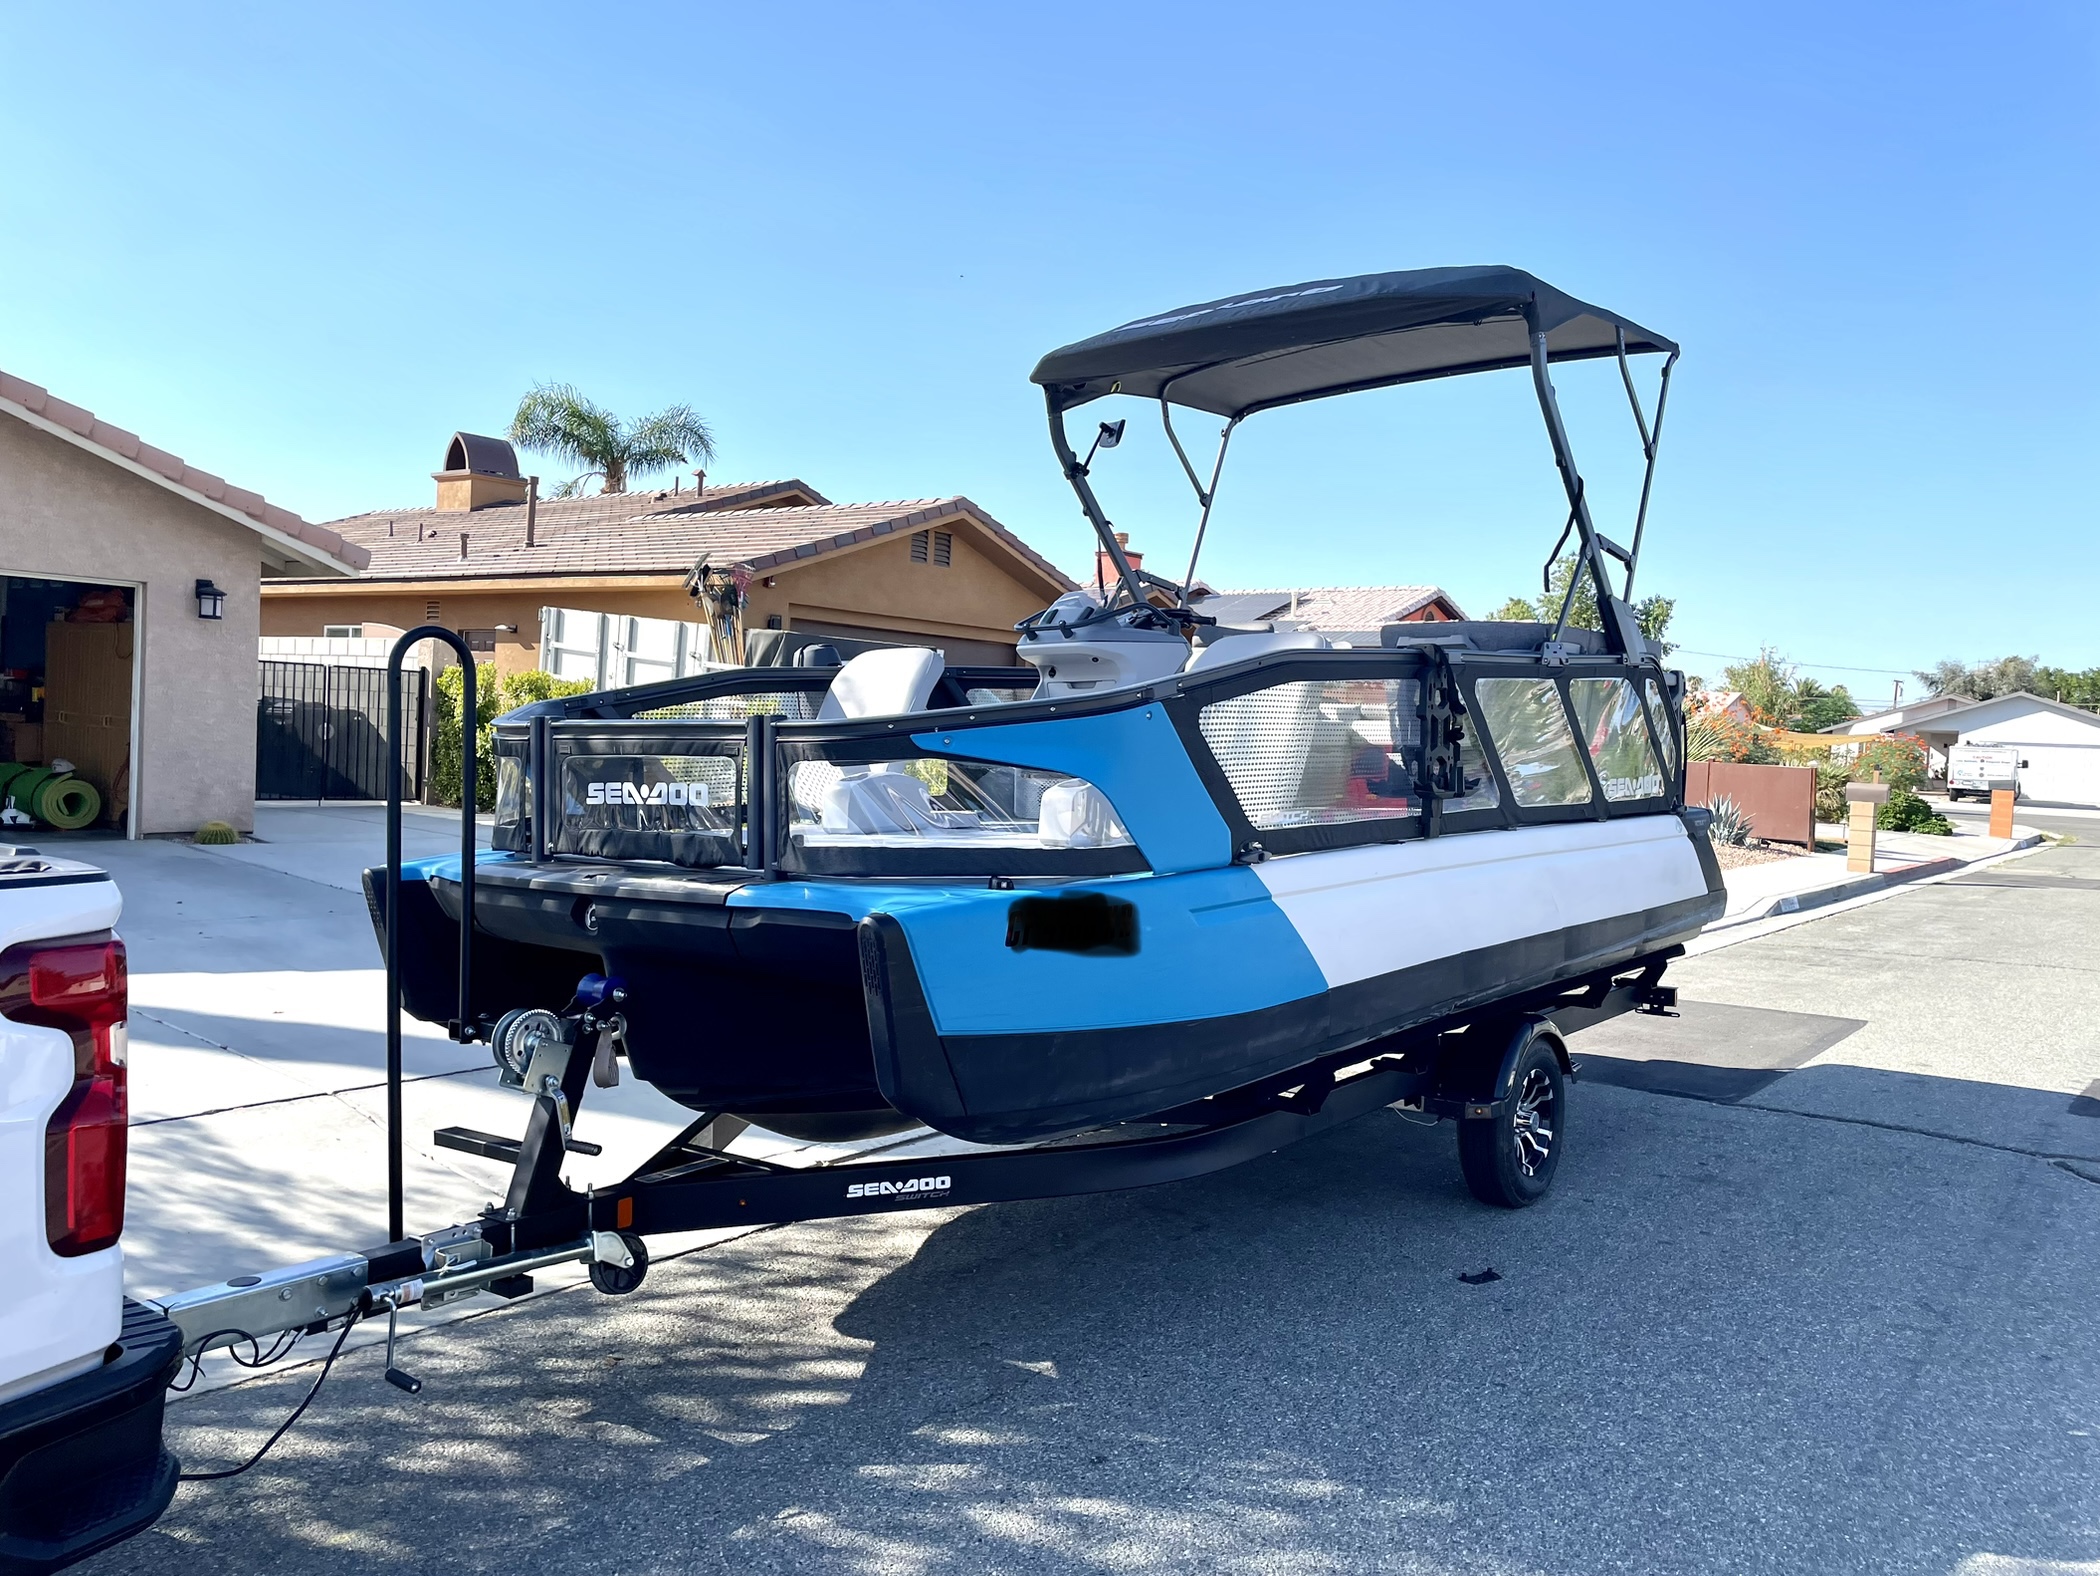 2022 21 foot SeaDoo Switch Sport Pontoon Boat for sale in Cathedral Cty, CA - image 1 